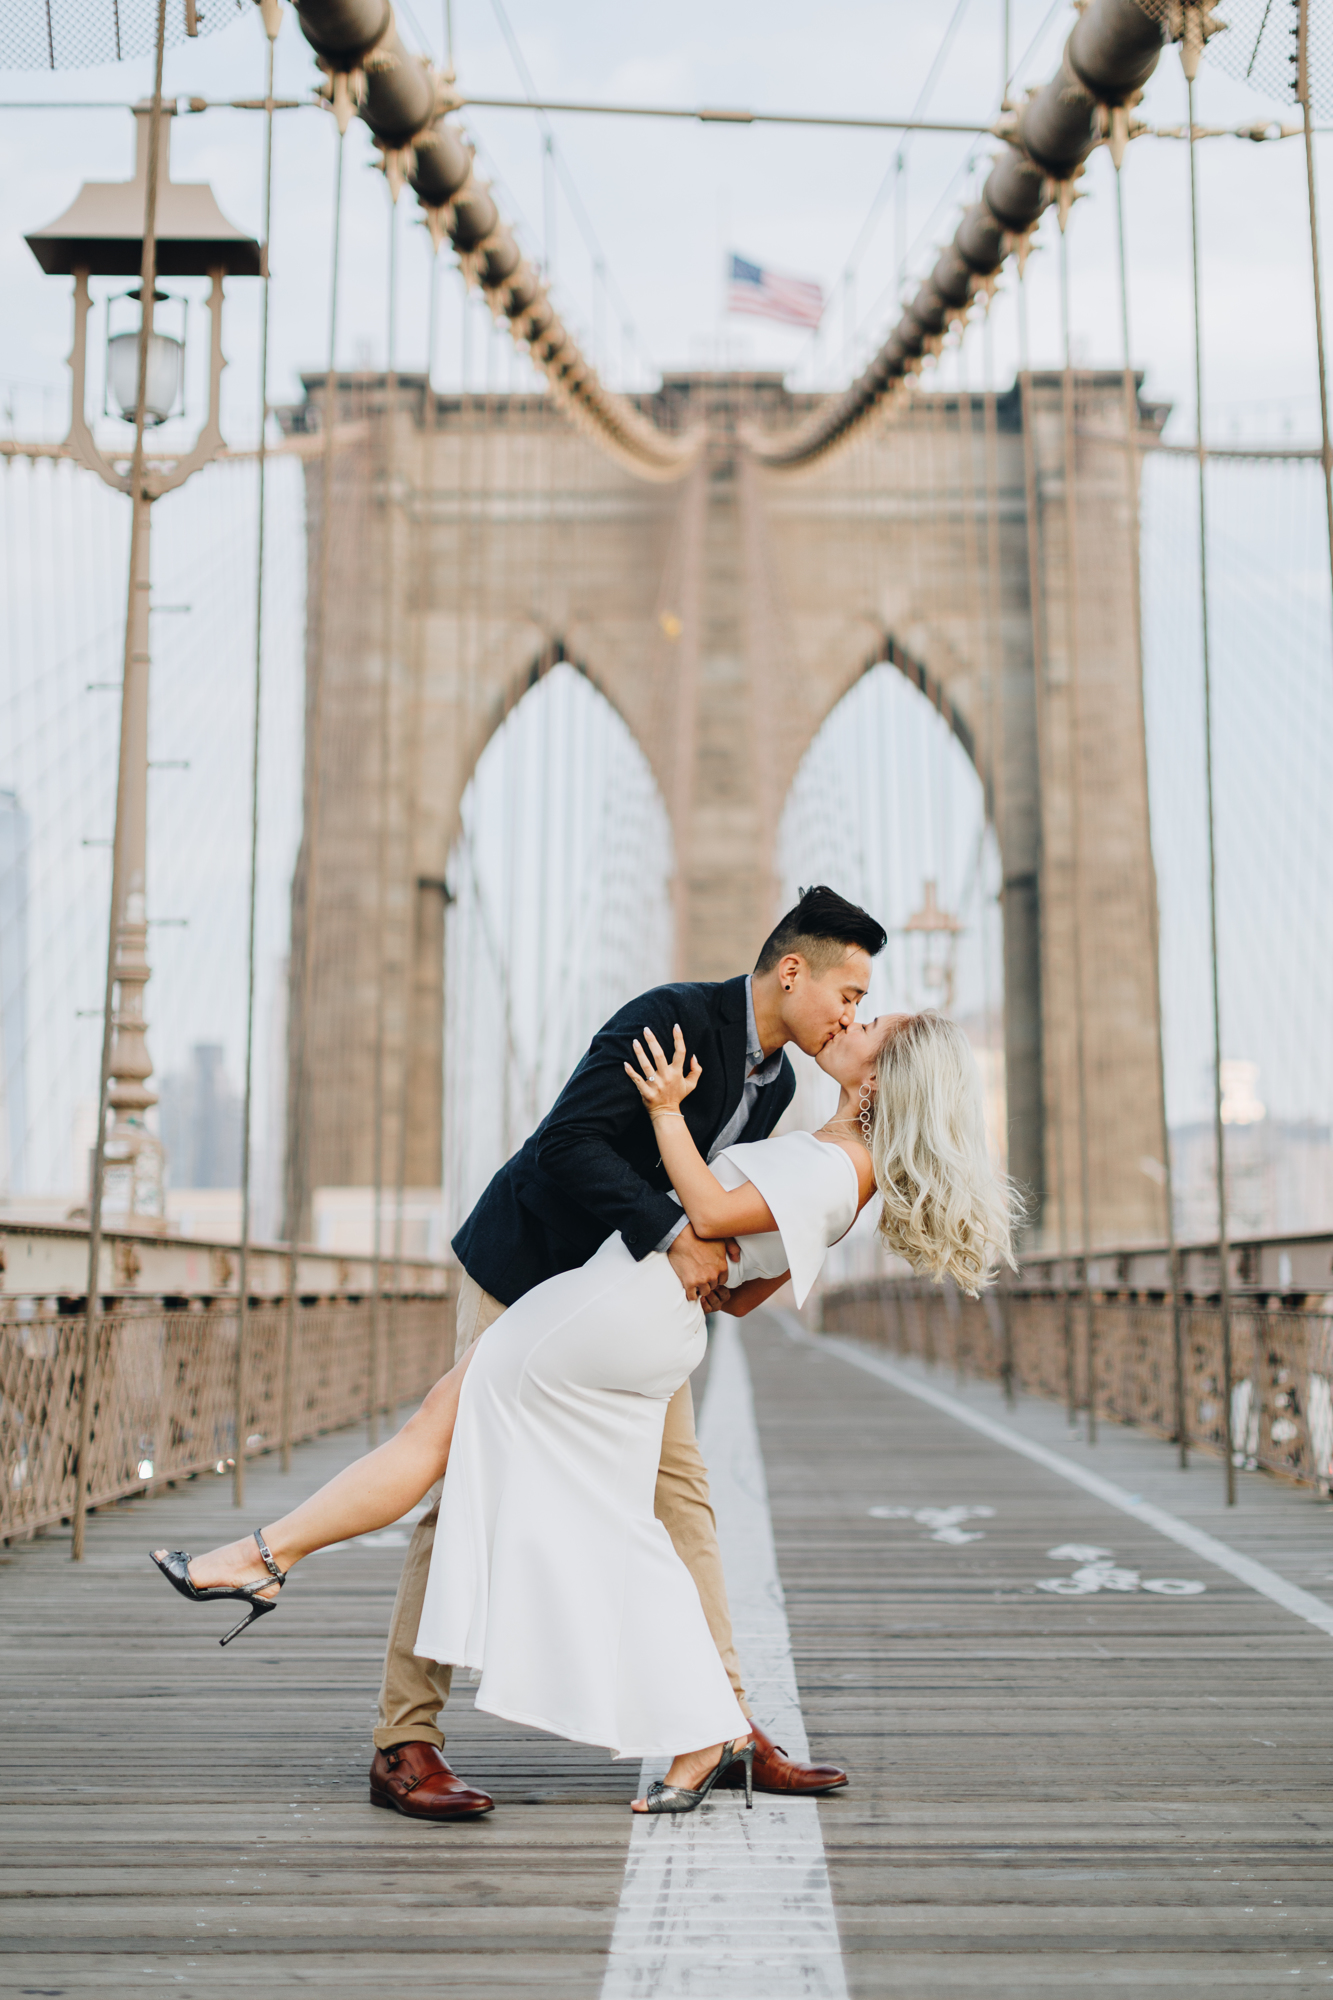 Iconic Brooklyn Bridge engagement photo with bride in white dress